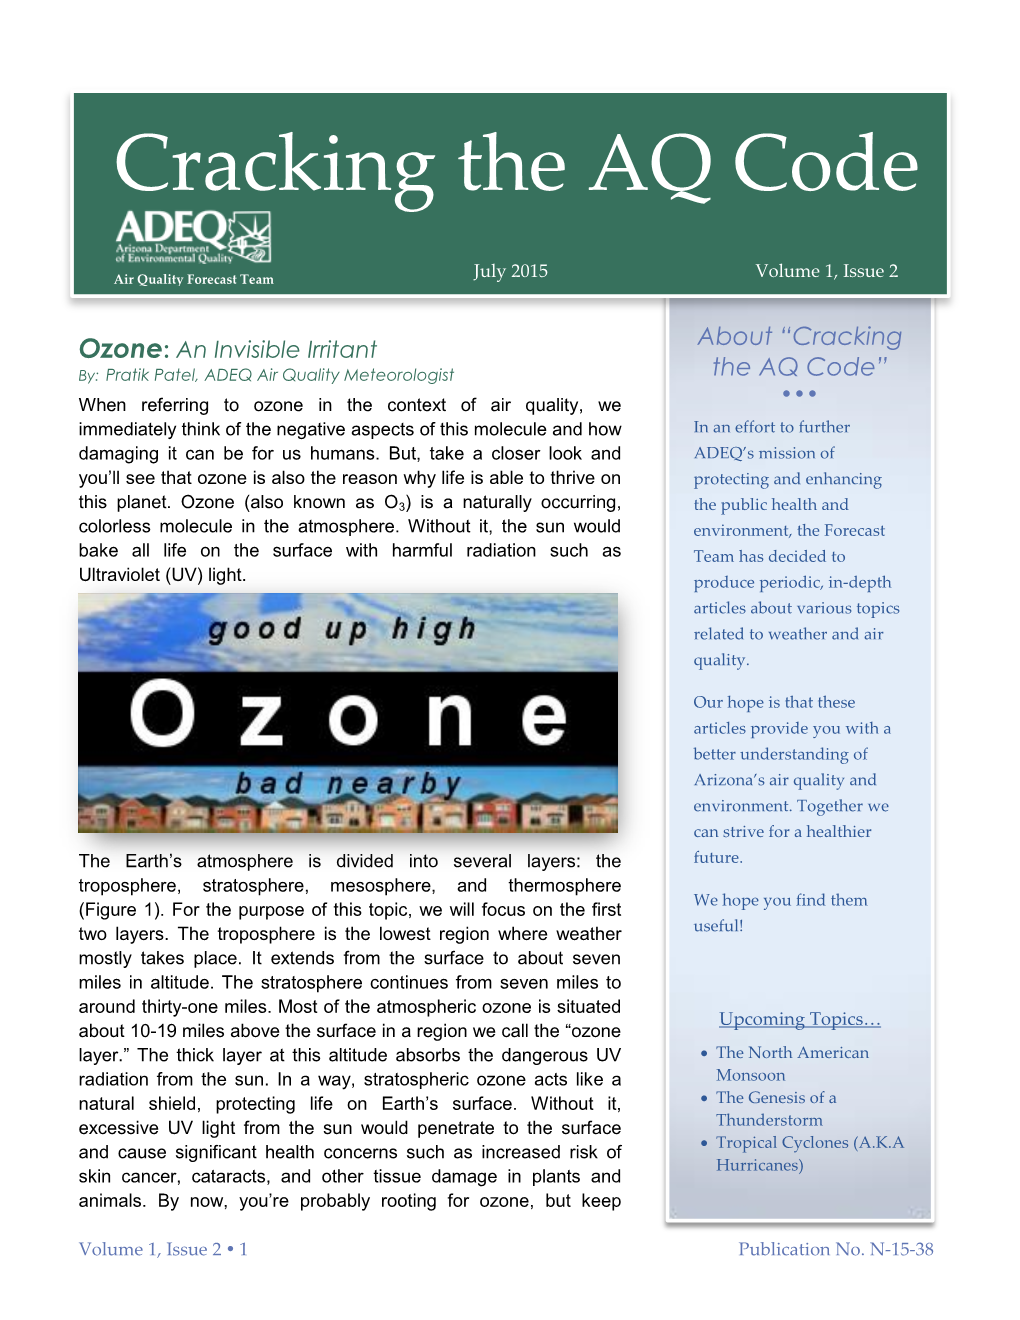 Ozone: an Invisible Irritant